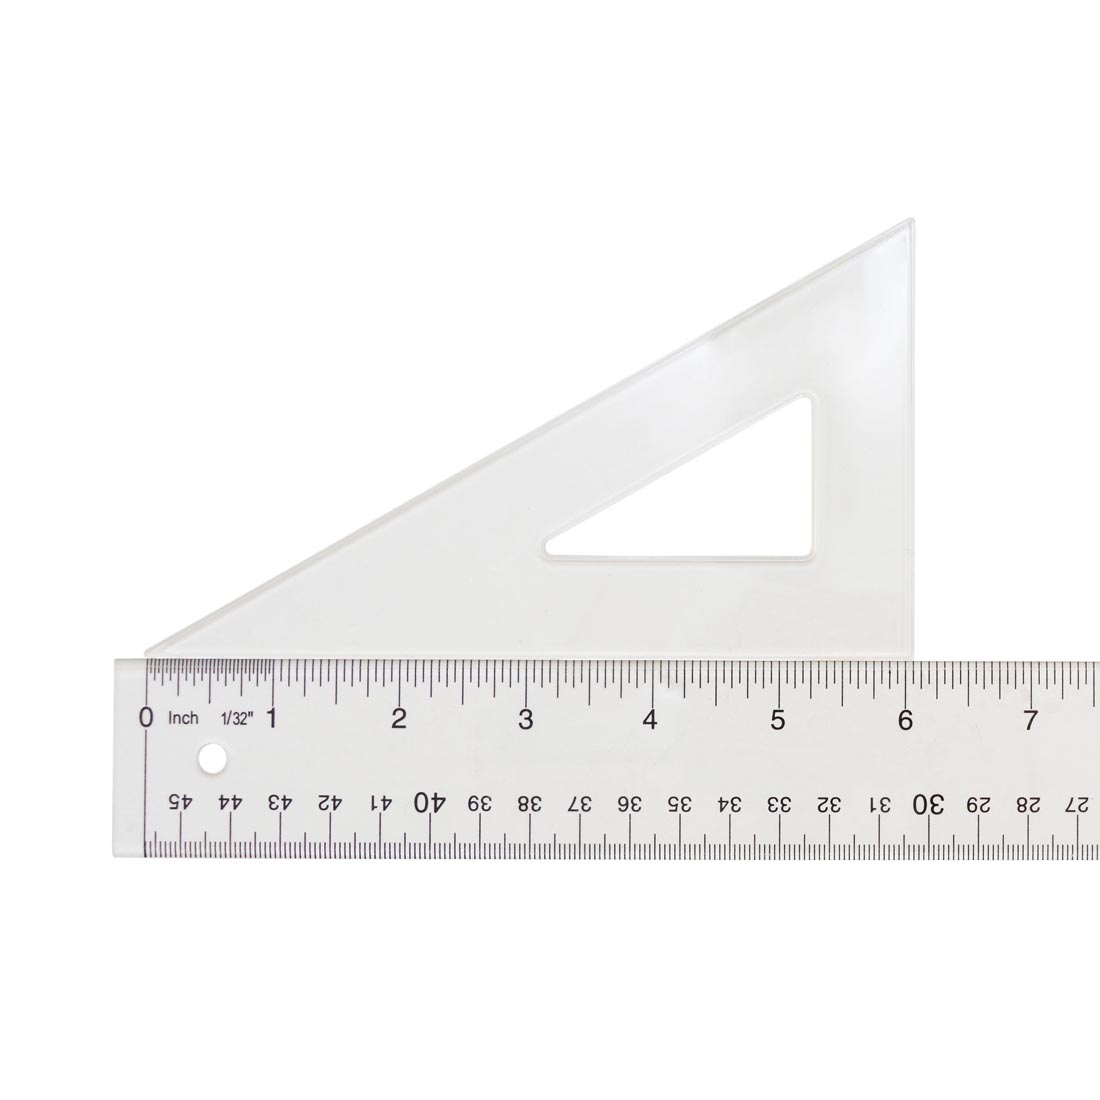 Triangular Scale with 30 and 60 Degree angles; shown with a ruler to measure the length of 6"